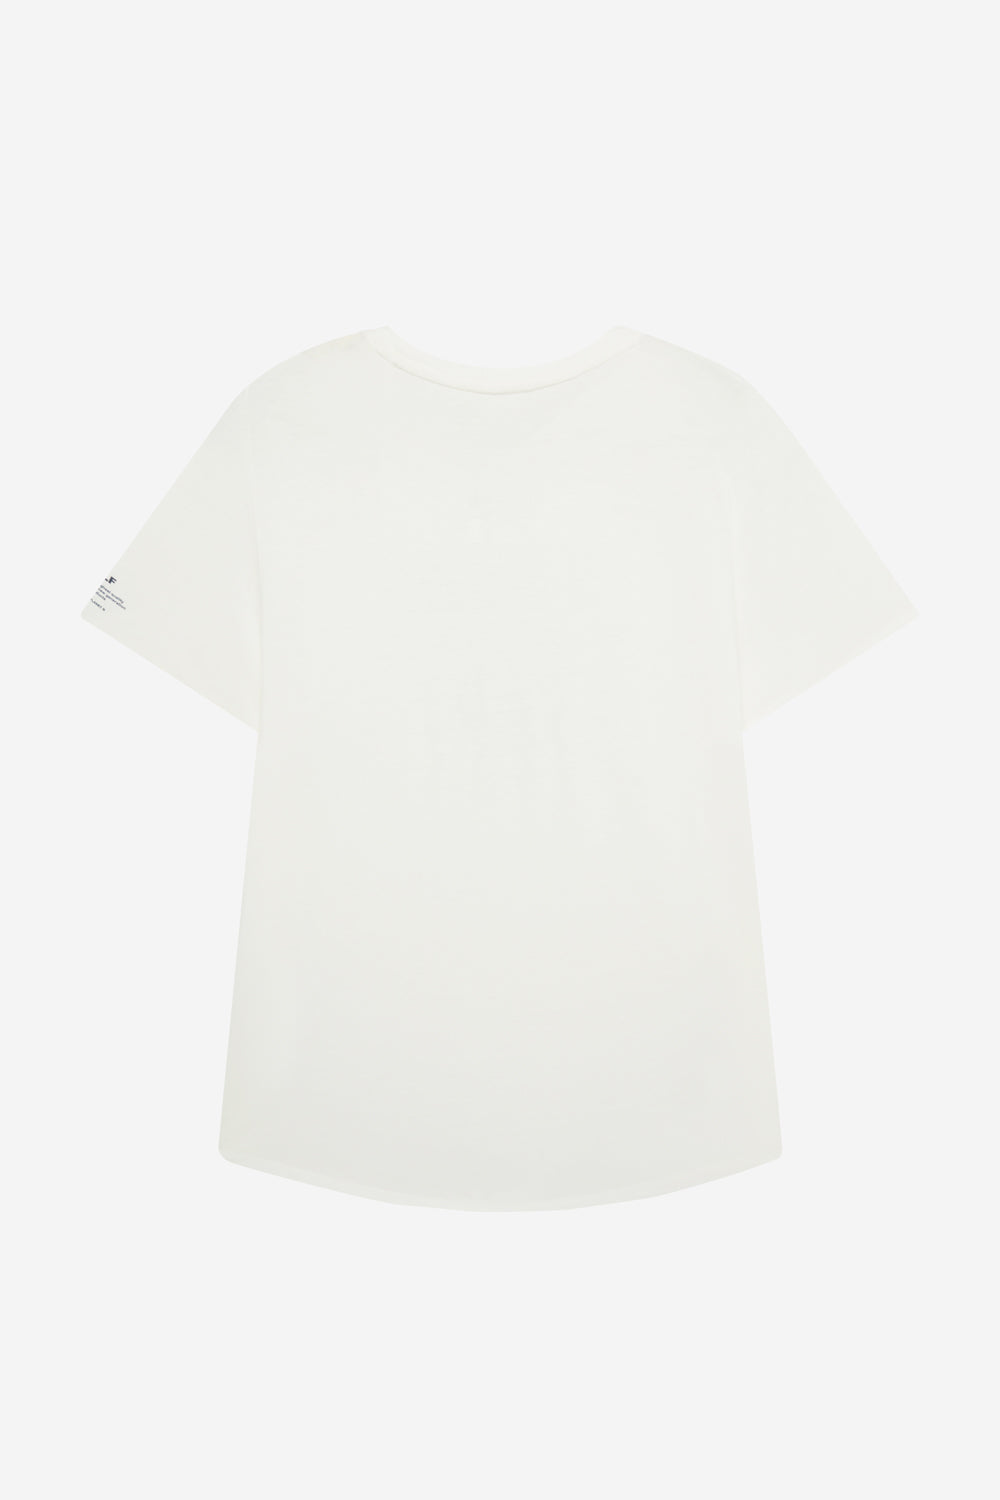 MOTHER'S DAY T-SHIRT WHITE